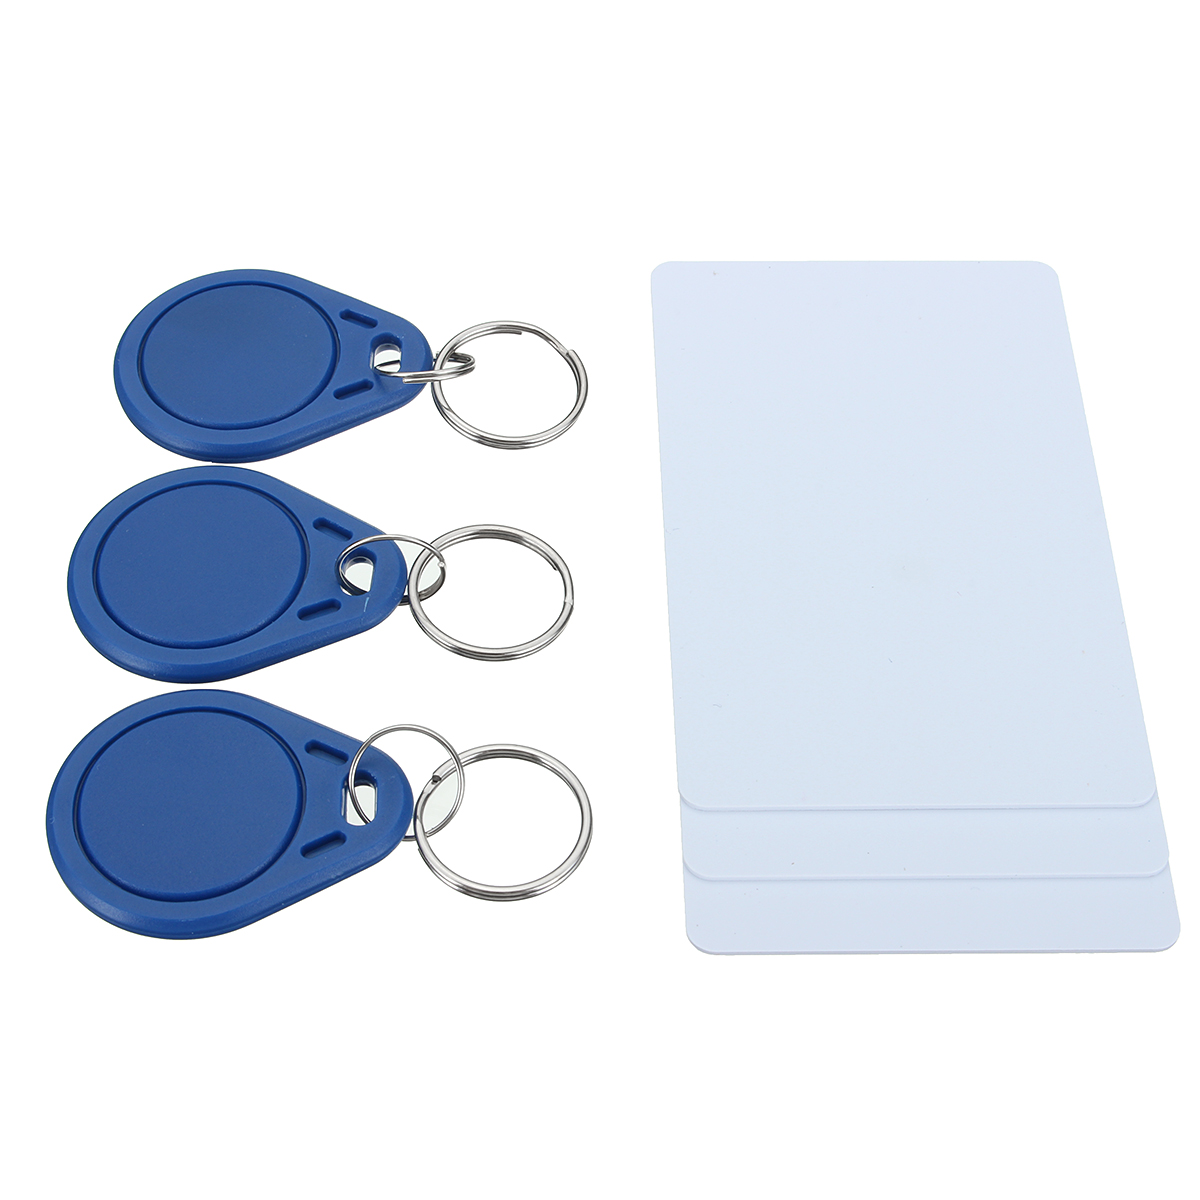 10-Frequency-RFID-Copy-Encrypted-NFC-Smart-ID-IC-Card-Reader-Writer-with-12pcs-Keyfbobs-1270370